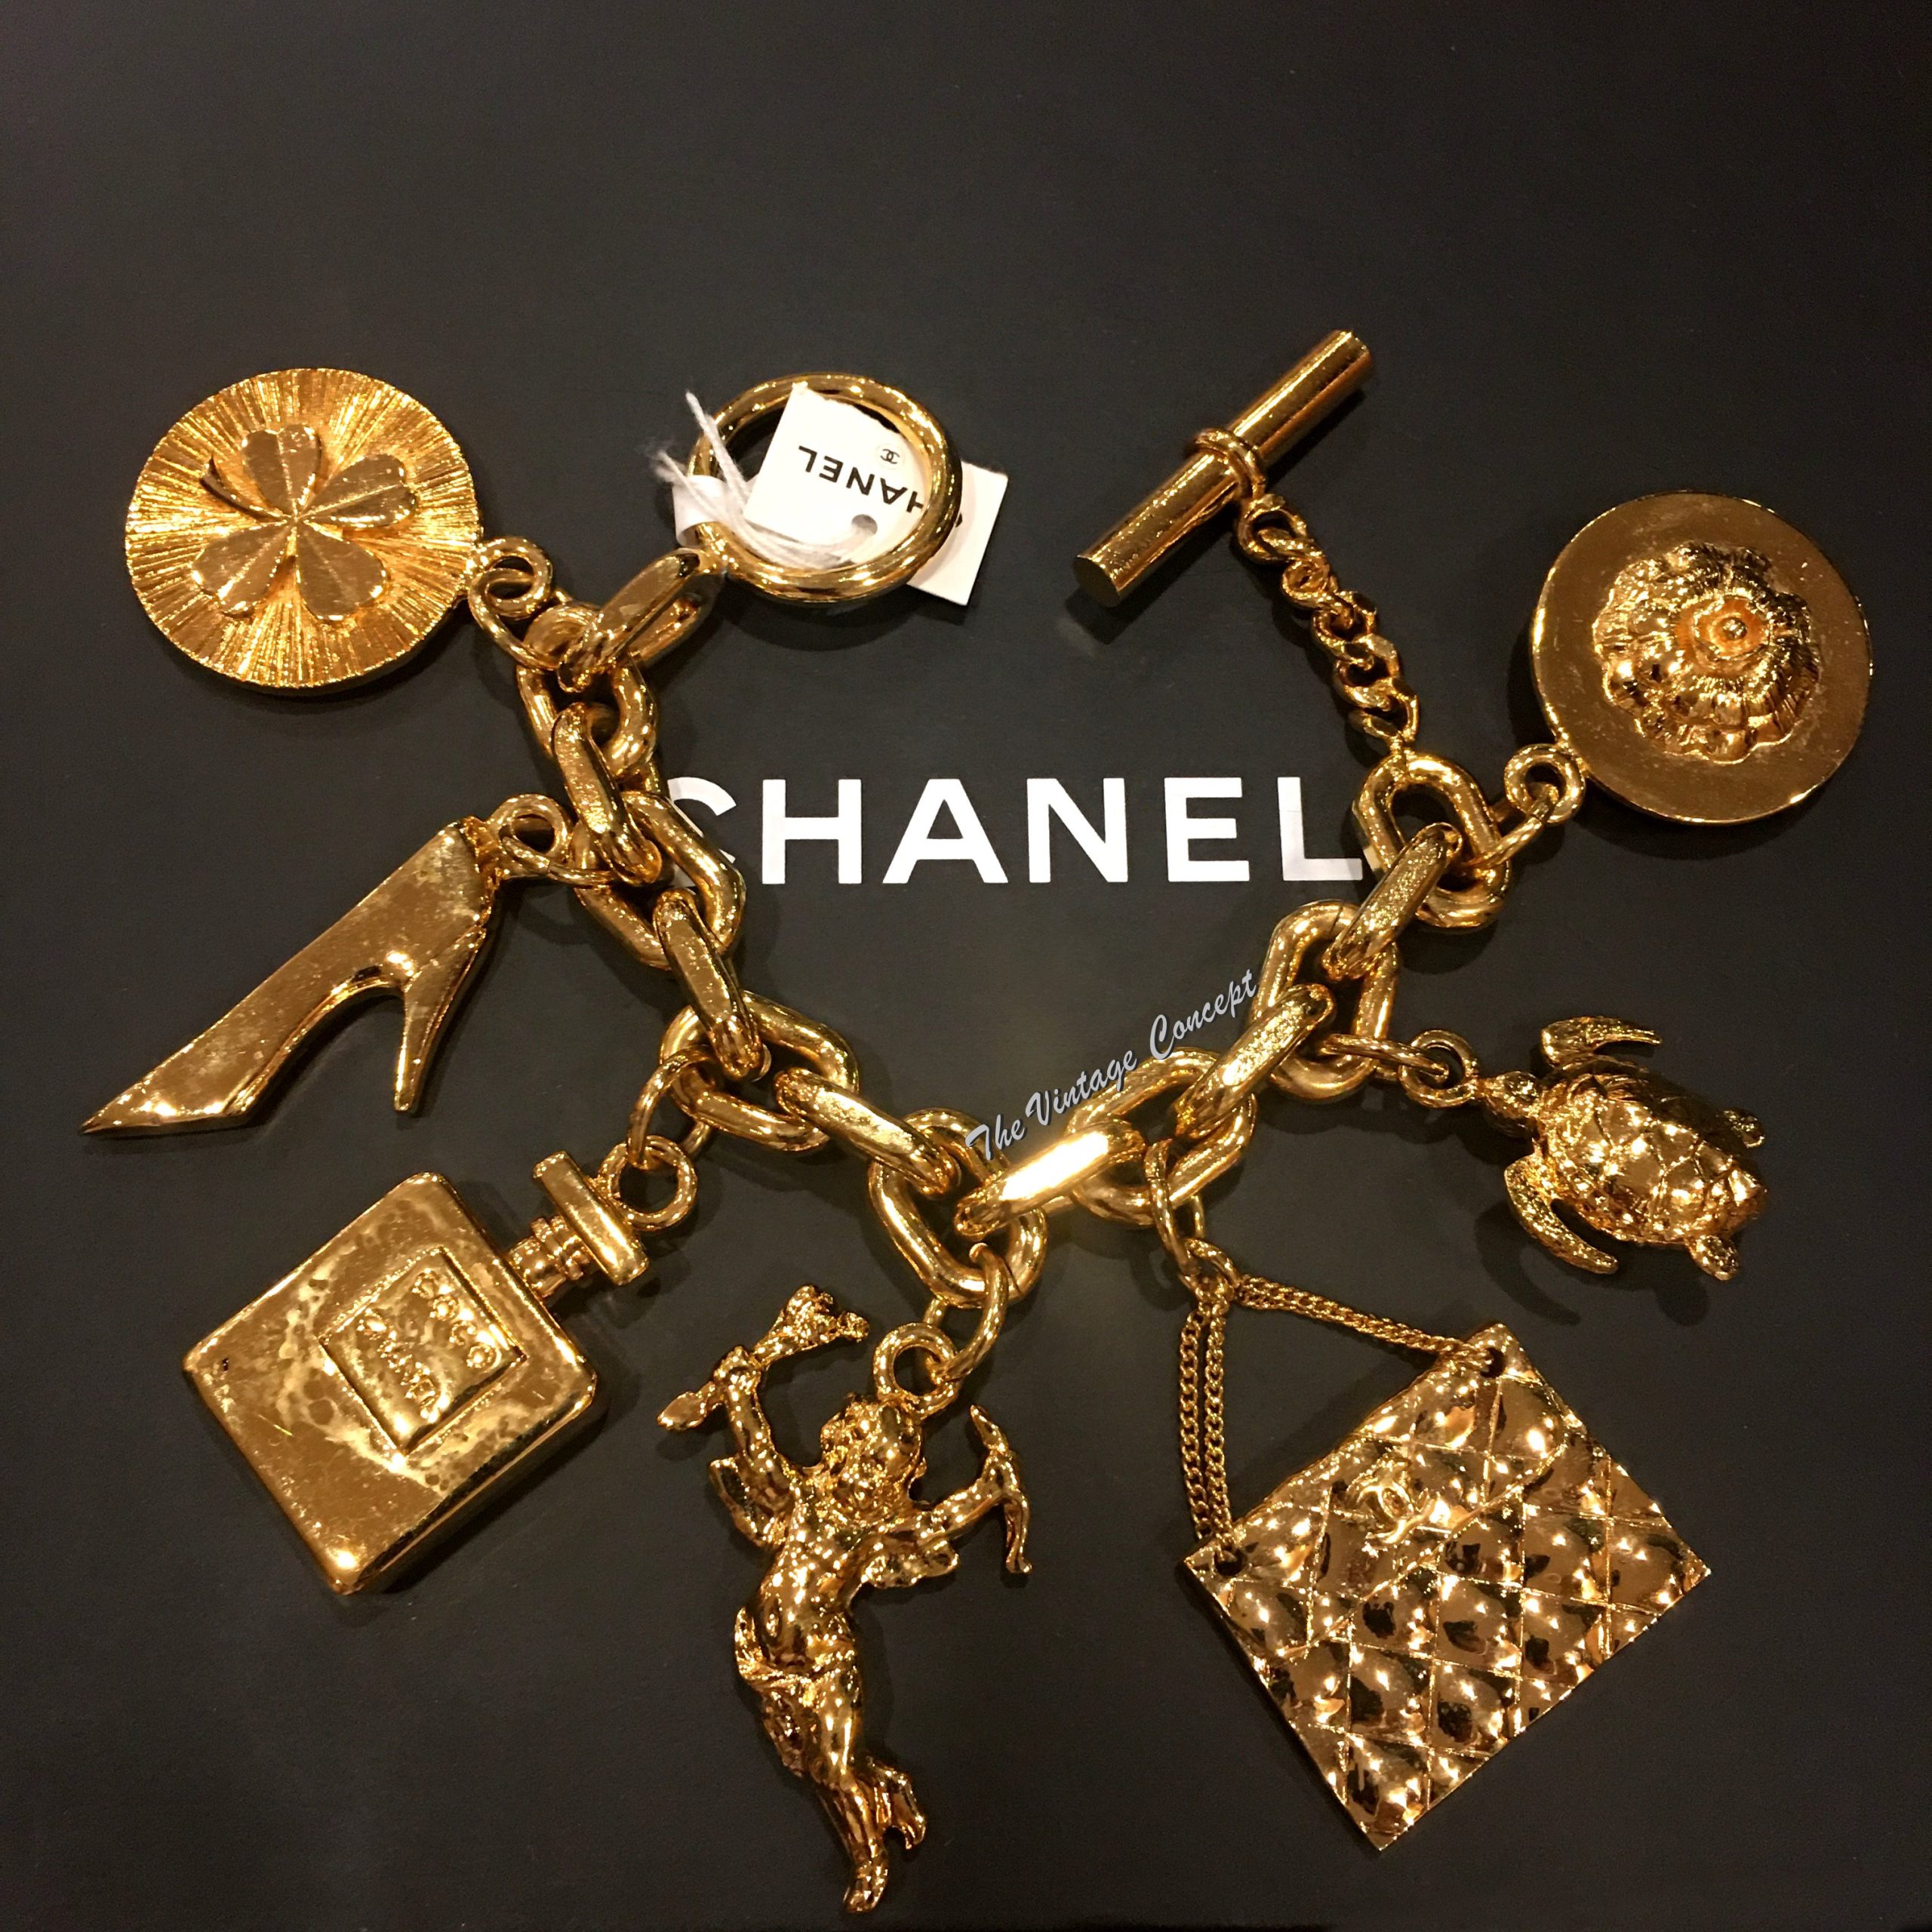 CHANEL, Accessories, Chanel Cc Acrylic Cuff Bracelet Authentic Rare B6  Strass Resin